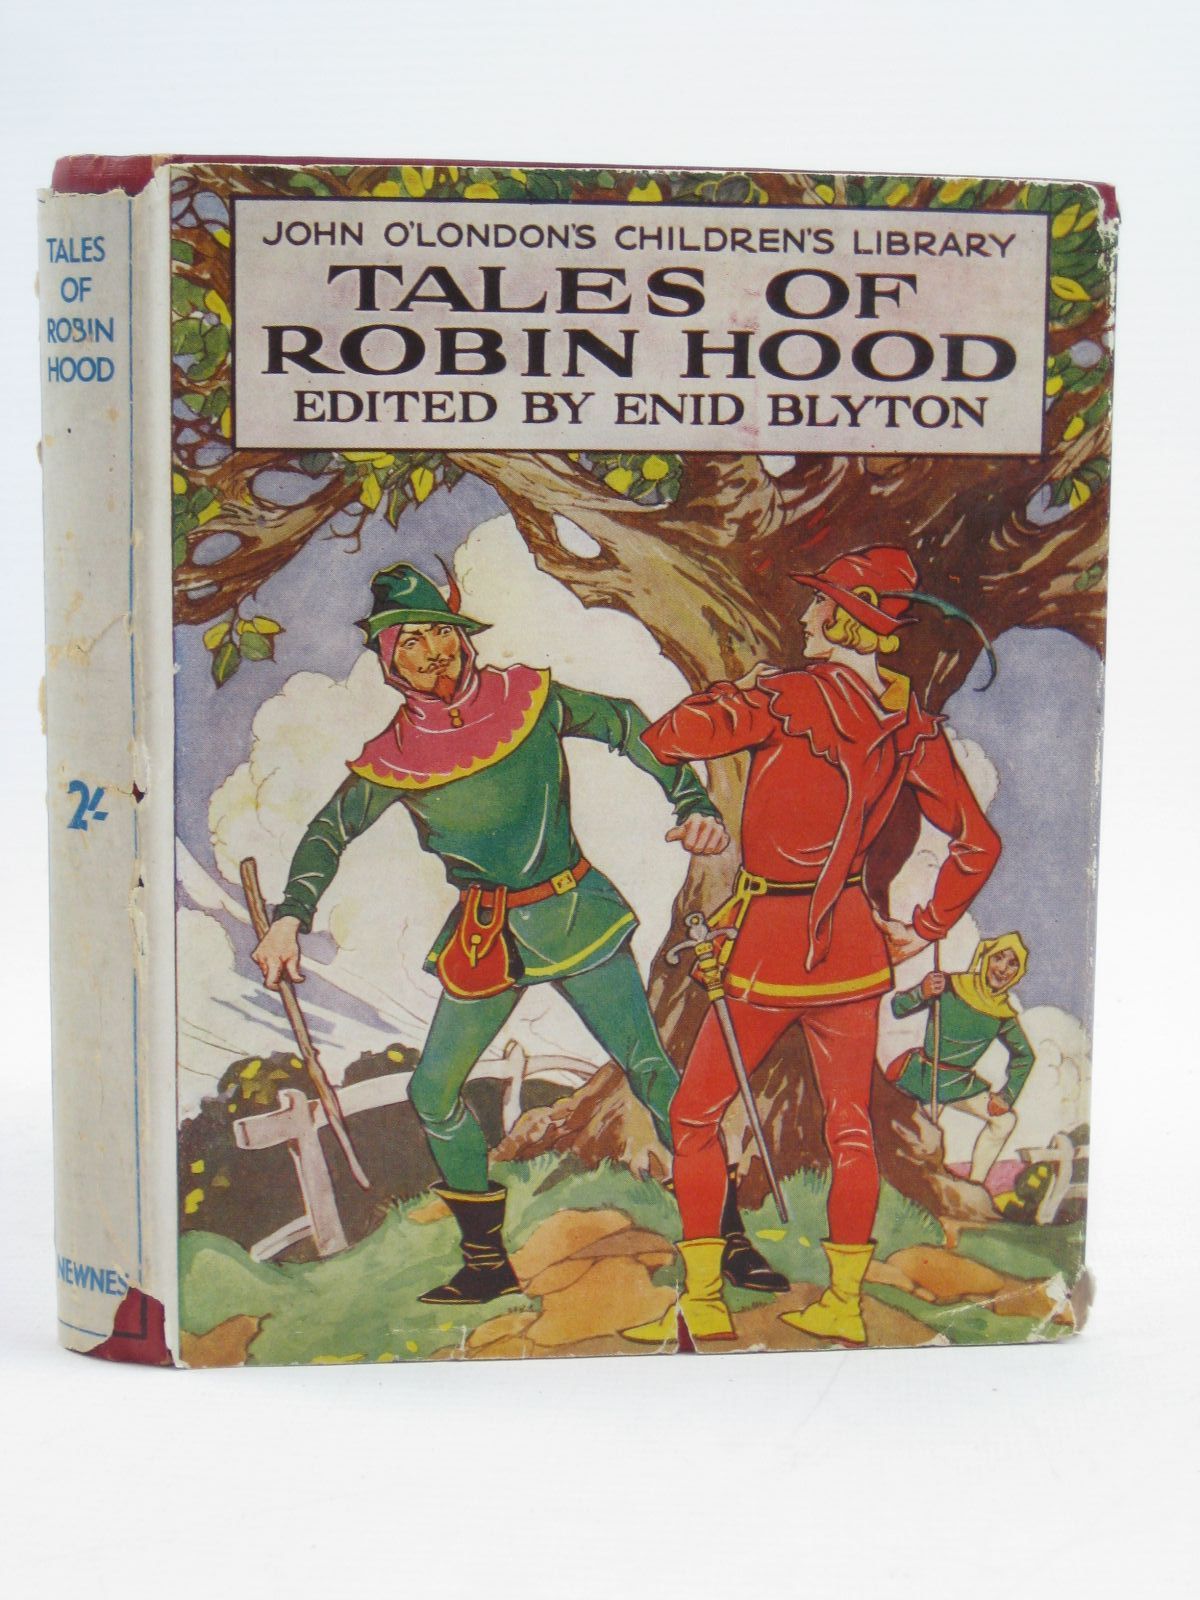 Cover of TALES OF ROBIN HOOD by Enid Blyton